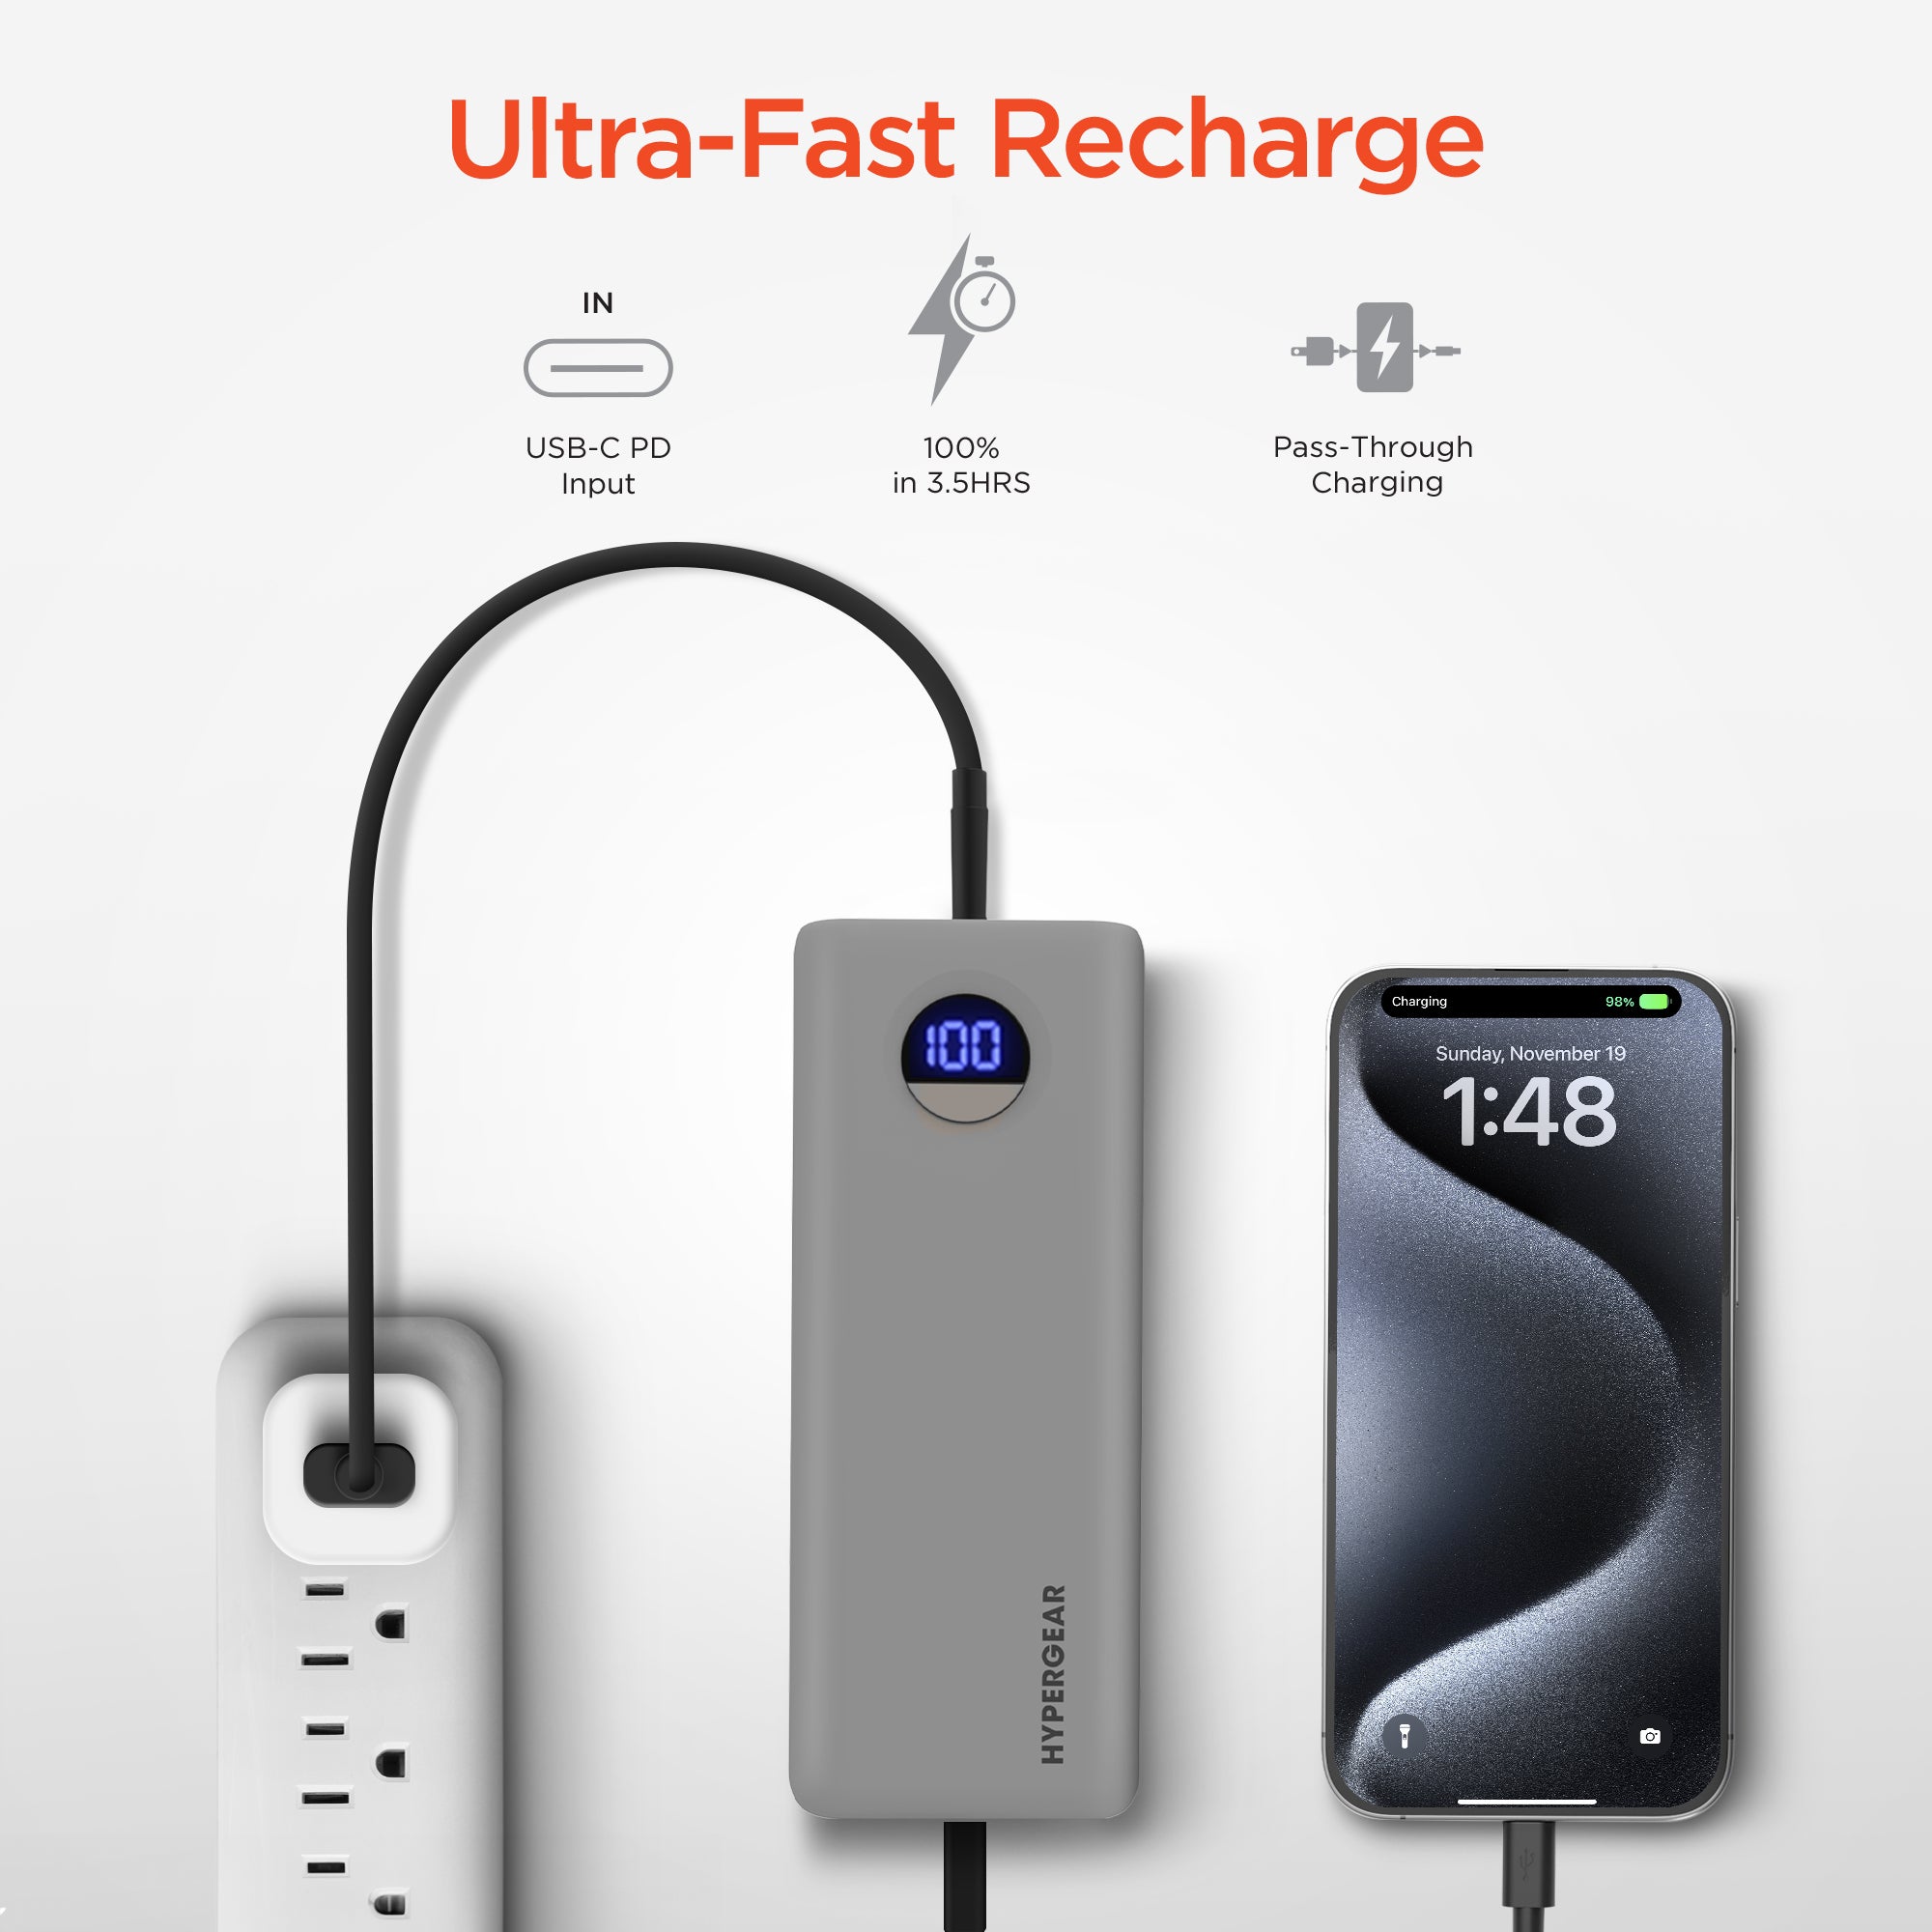 20,000mAh | Power Pack Pro+ Fast Charge Power Bank with 35W USB-C PD PPS and Digital Display | Gray